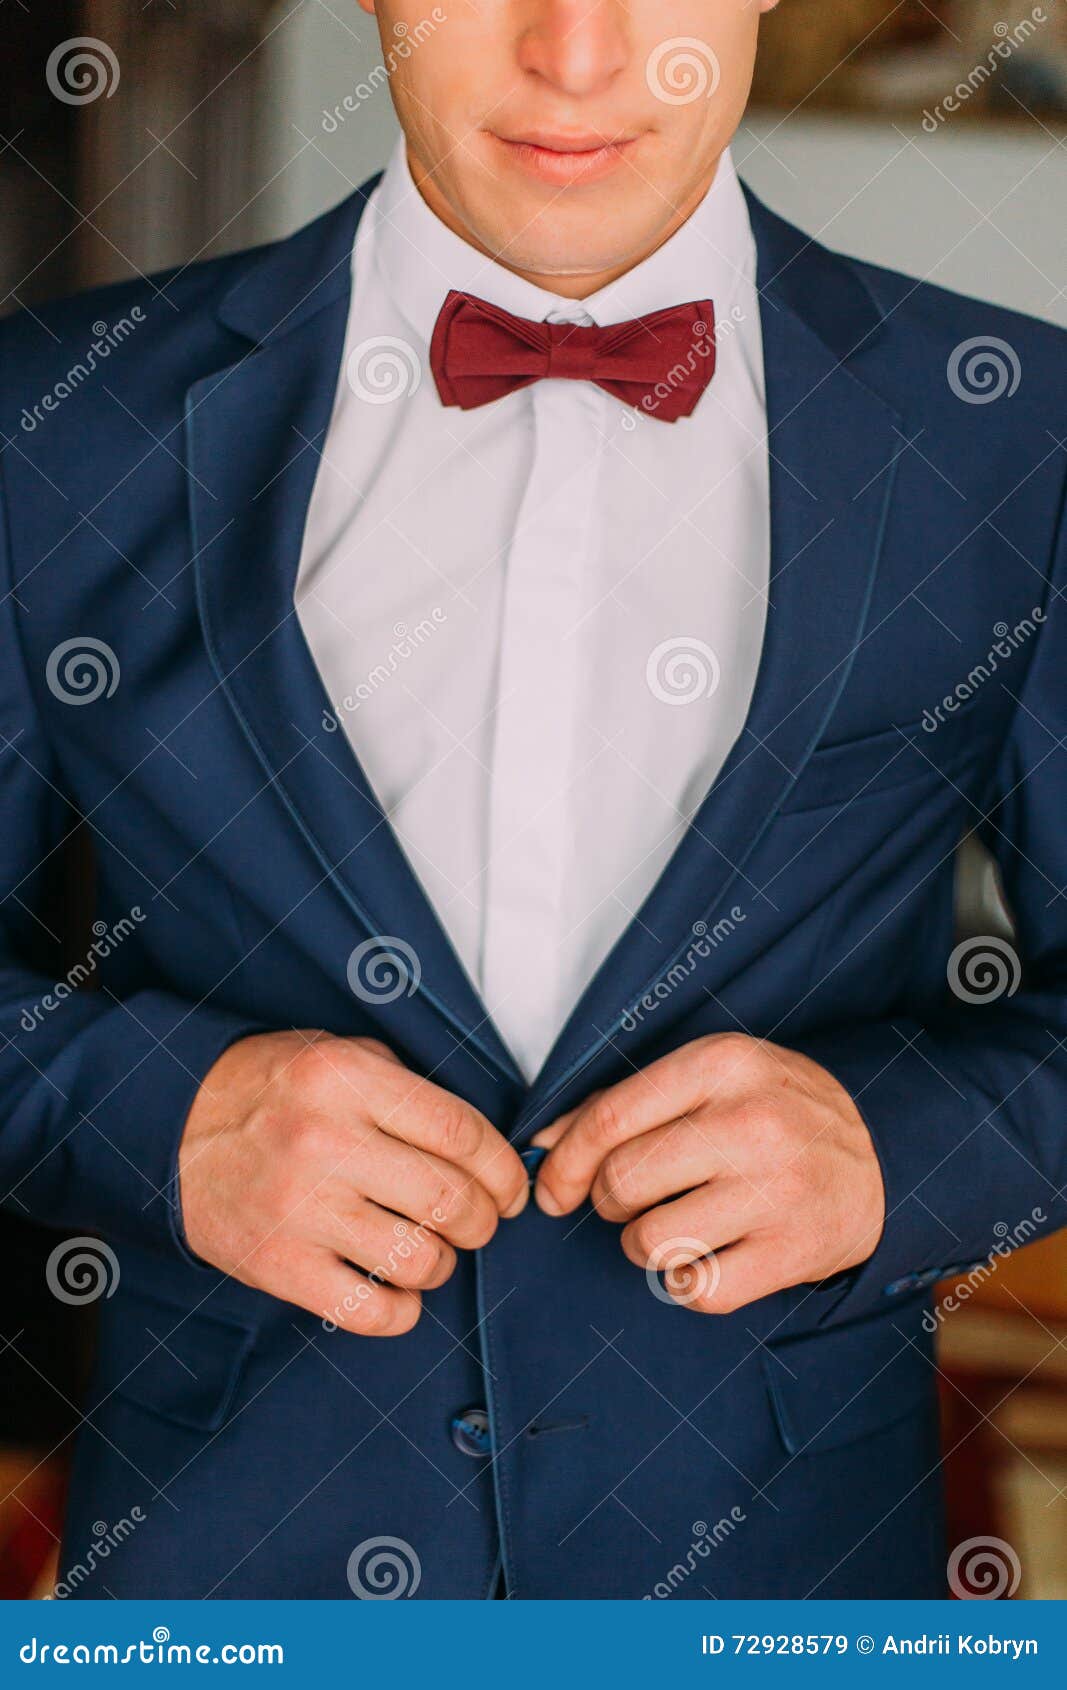 Man With Burgundy Bow Tie And White Shirt Buttons Up His Dark Blue Blazer  Stock Image - Image Of Groom, Fashion: 72928579